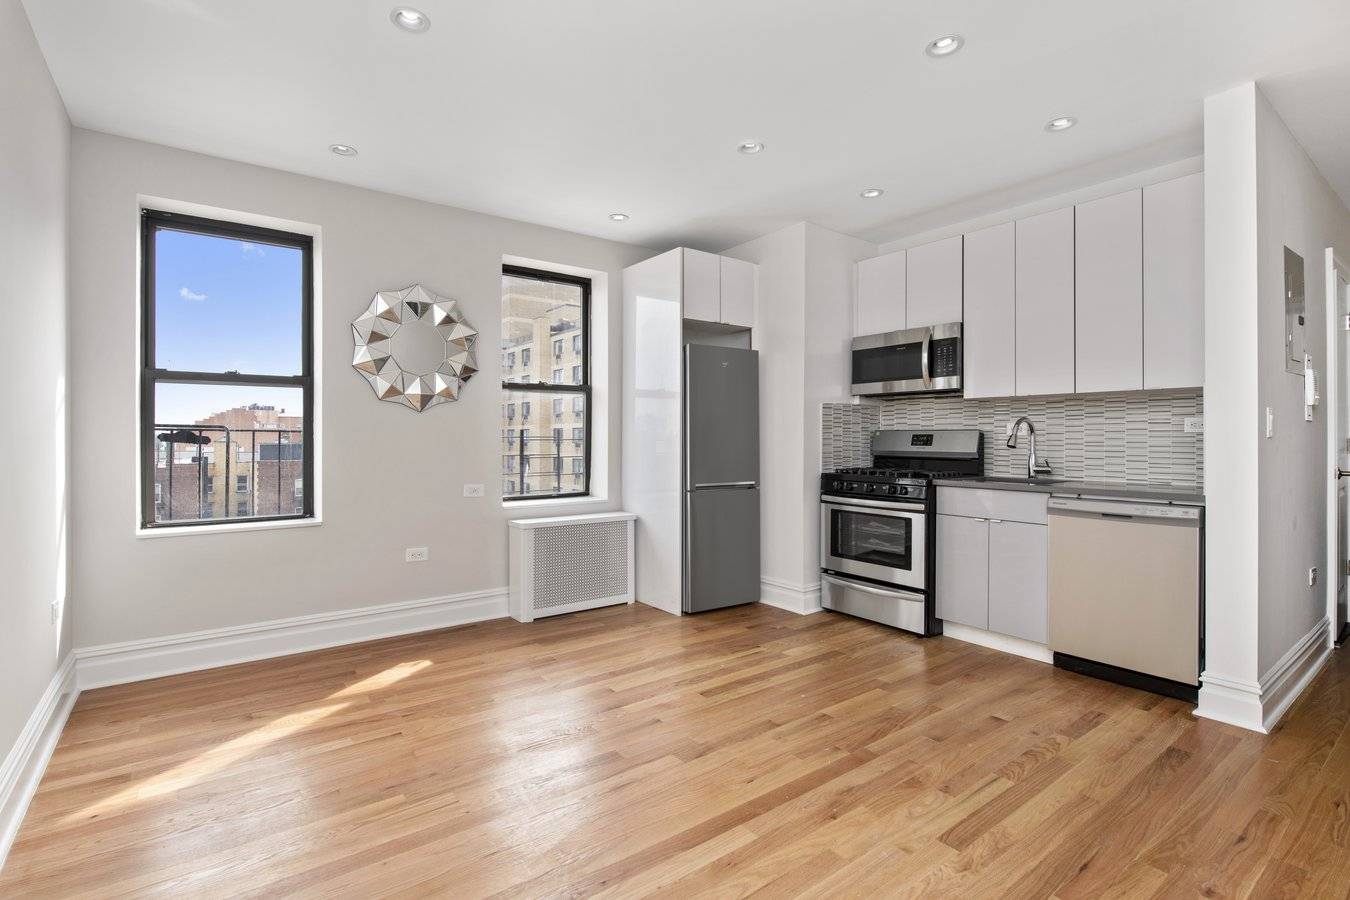 This modern, gut renovated one bedroom, one bath apartment features new oak hardwood floors, open kitchen with Quartz counter tops, stainless steel appliances and a glass tiled back splash, sparkling ...